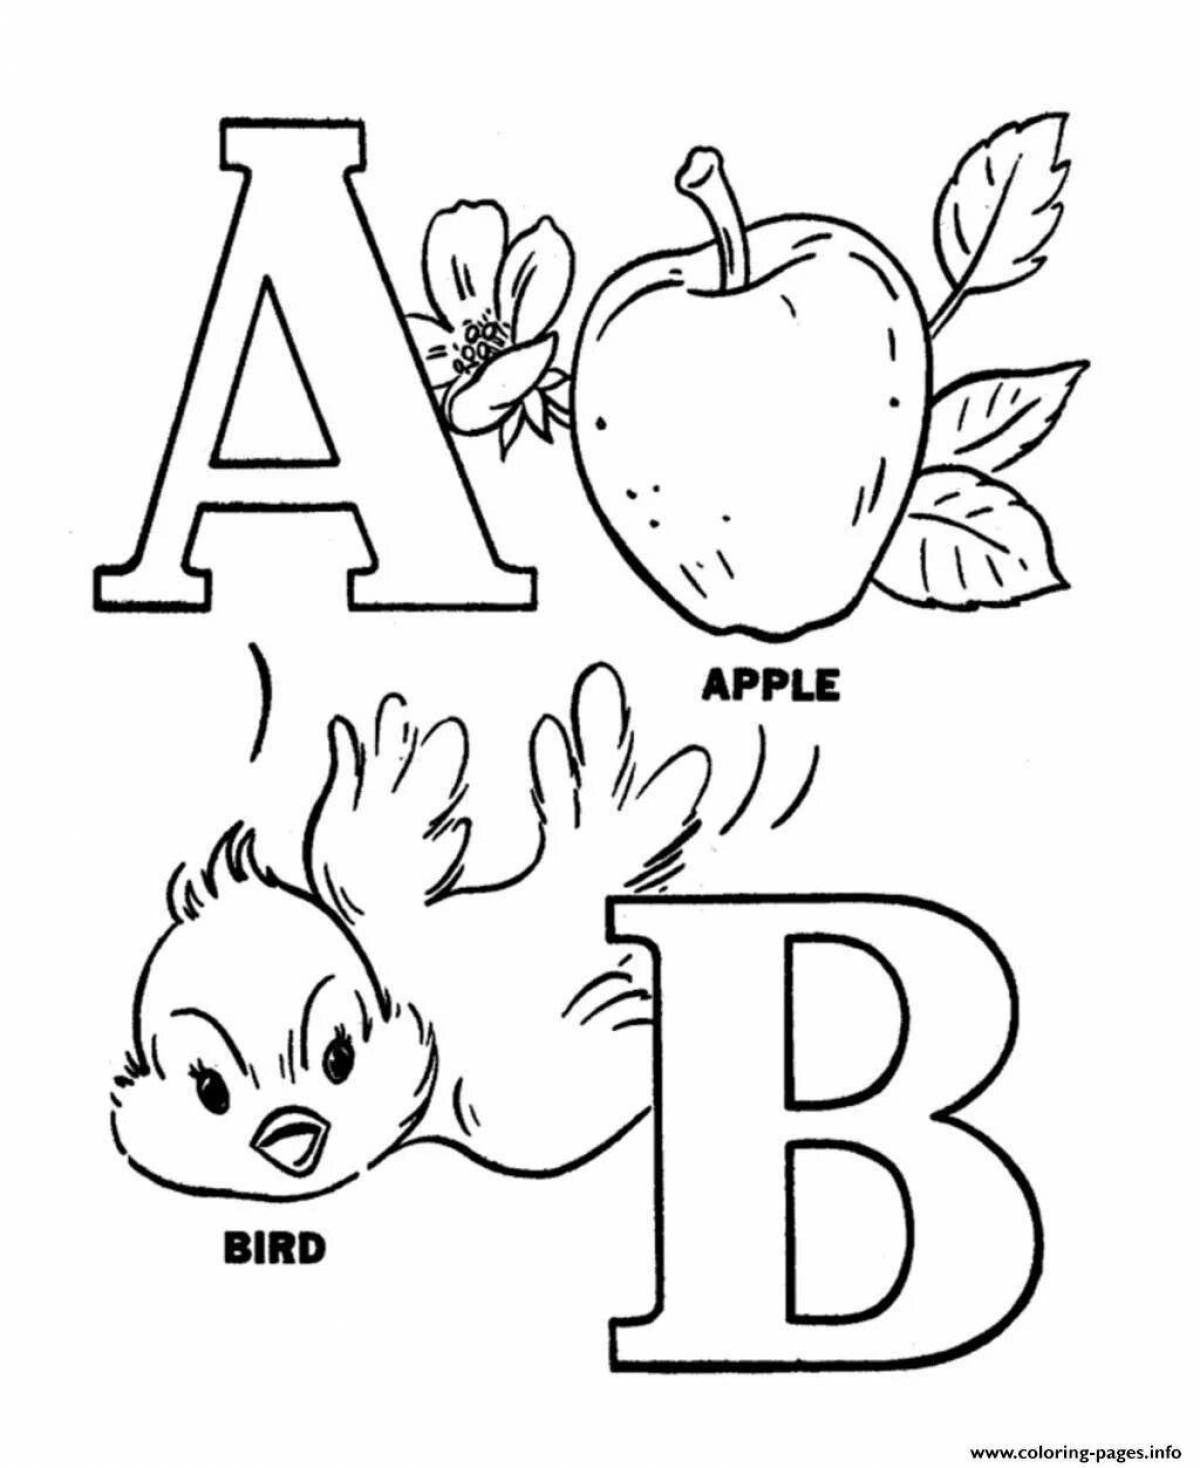 Color-explosion abc coloring page for kids